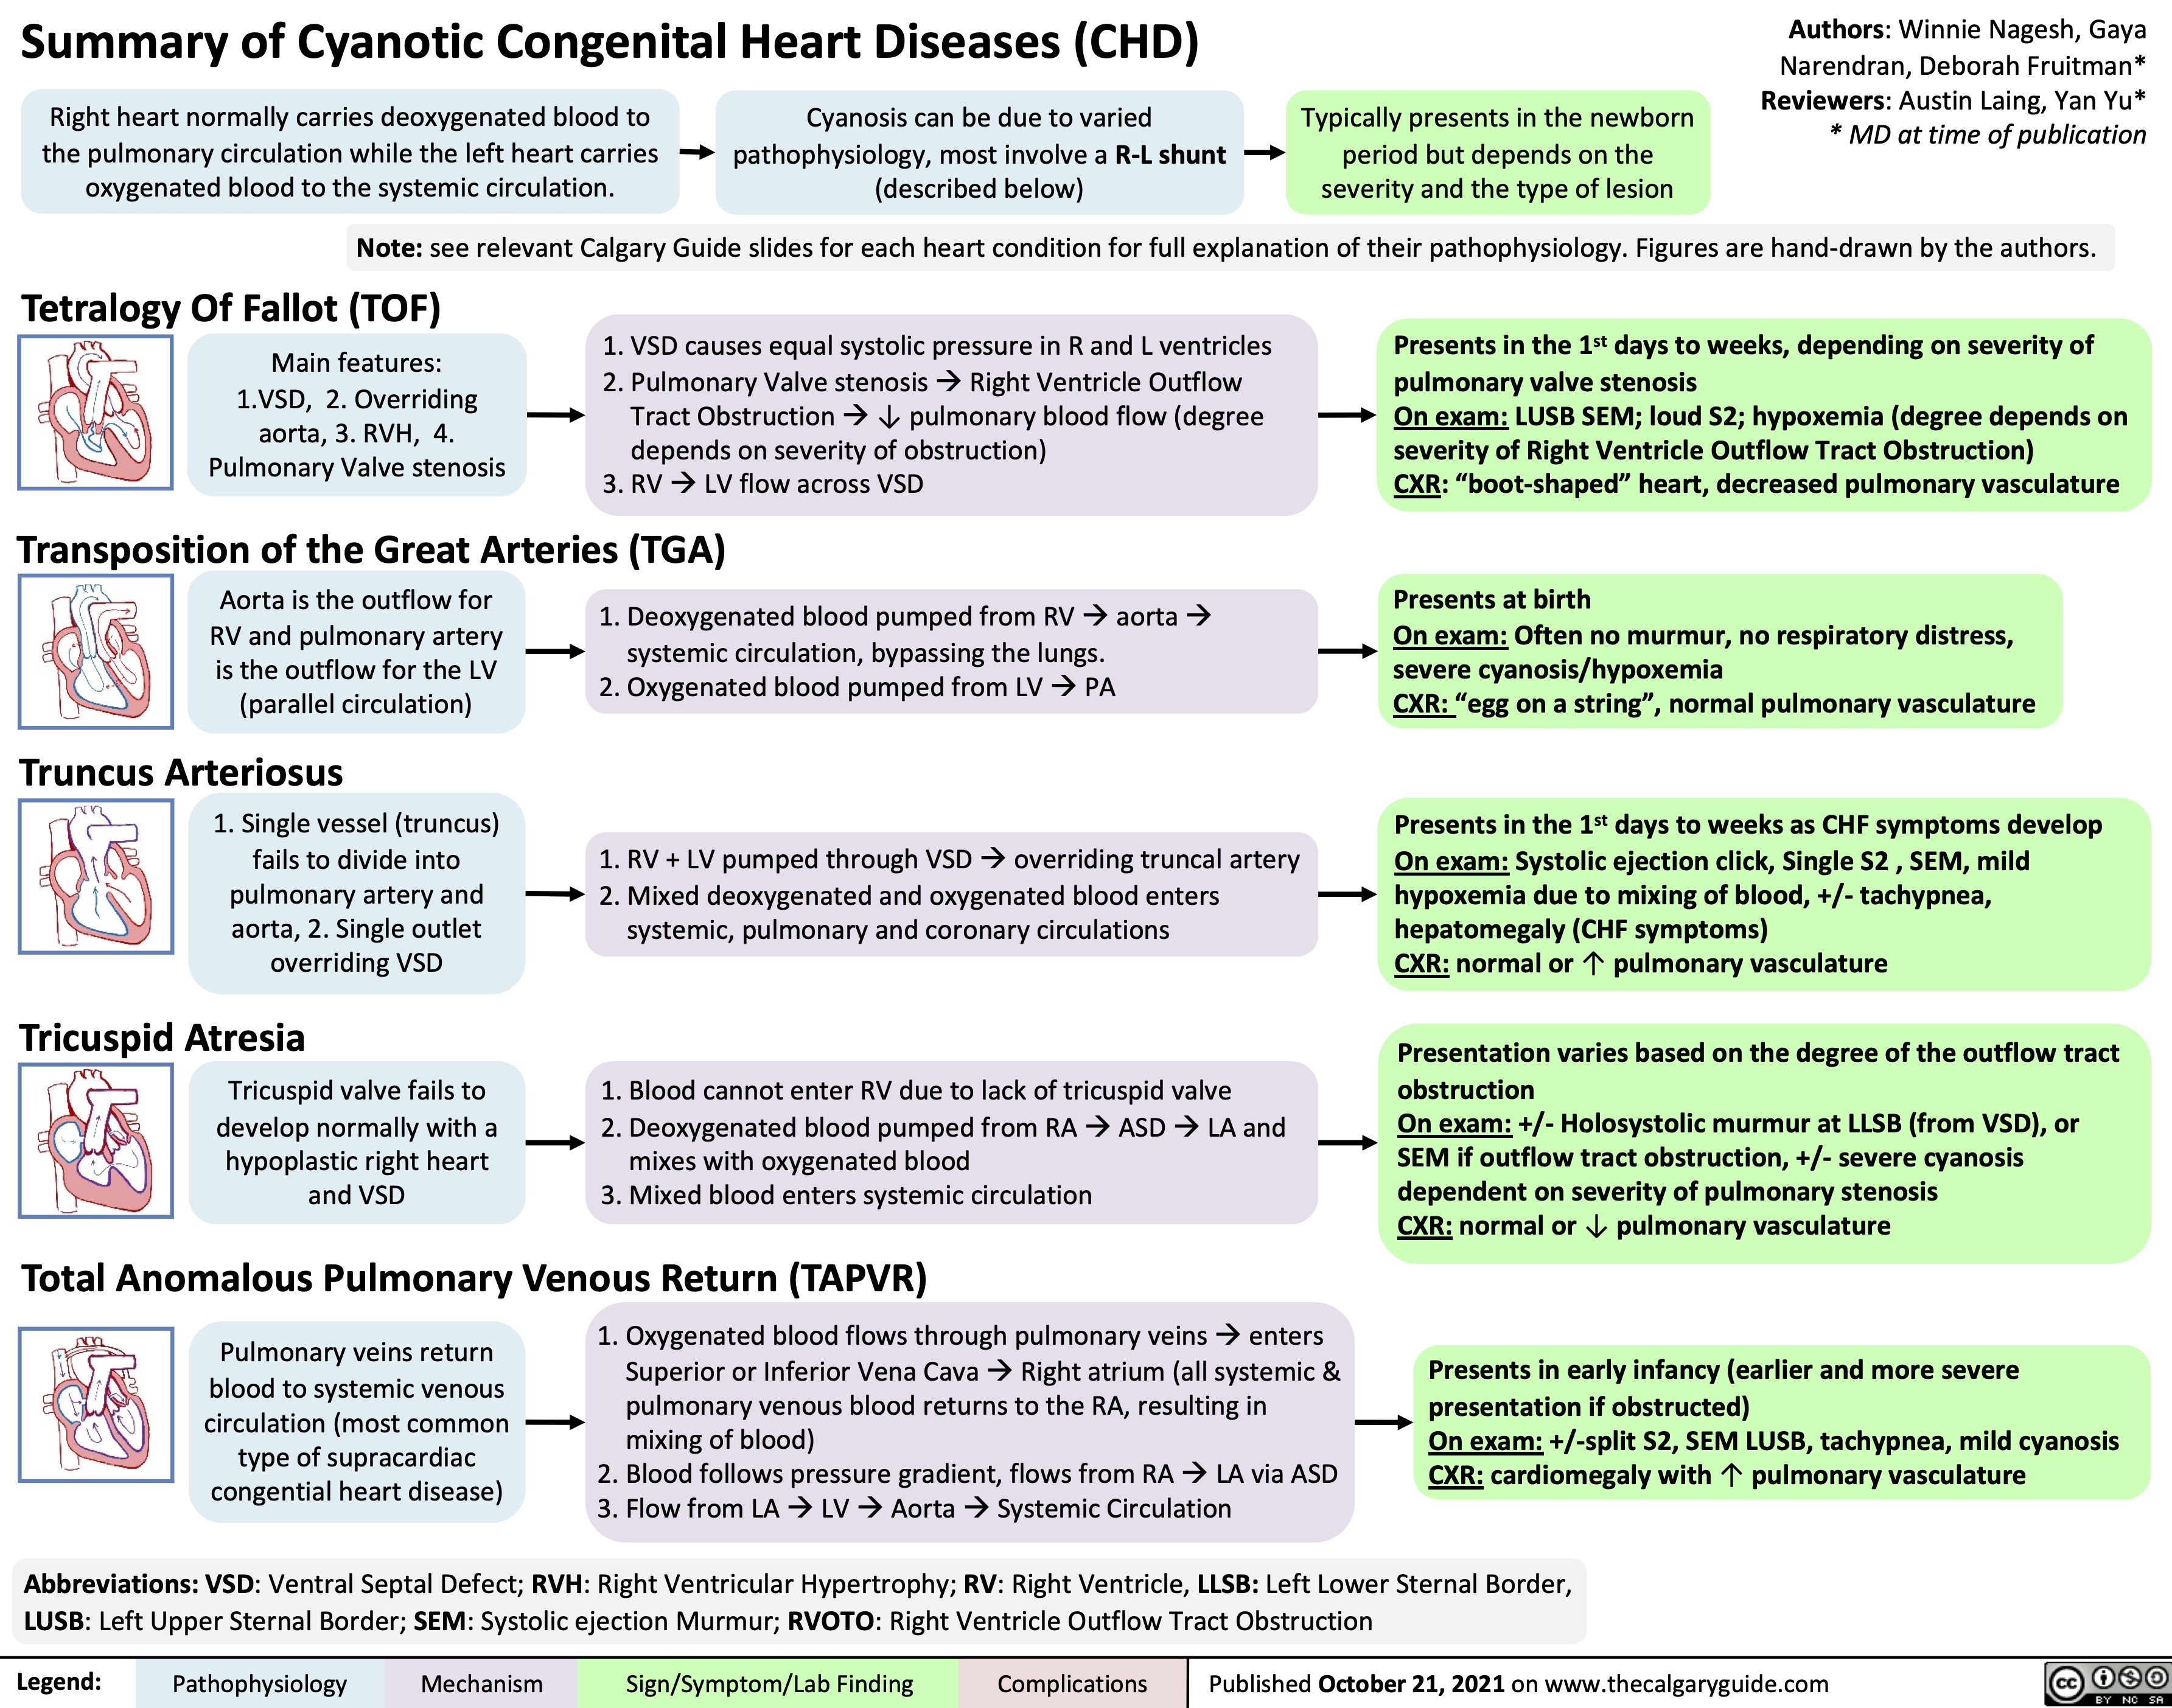 Summary of Cyanotic Congenital Heart Diseases (CHD)
Authors: Winnie Nagesh, Gaya Narendran, Deborah Fruitman* Reviewers: Austin Laing, Yan Yu* * MD at time of publication
   Right heart normally carries deoxygenated blood to the pulmonary circulation while the left heart carries oxygenated blood to the systemic circulation.
Cyanosis can be due to varied pathophysiology, most involve a R-L shunt (described below)
Typically presents in the newborn period but depends on the severity and the type of lesion
 Tetralogy Of Fallot (TOF)
Main features: 1.VSD, 2. Overriding aorta, 3. RVH, 4. Pulmonary Valve stenosis
1. VSD causes equal systolic pressure in R and L ventricles
2. Pulmonary Valve stenosisàRight Ventricle Outflow
Tract Obstructionà↓ pulmonary blood flow (degree
depends on severity of obstruction)
3. RVàLV flow across VSD
Presents in the 1st days to weeks, depending on severity of pulmonary valve stenosis
On exam: LUSB SEM; loud S2; hypoxemia (degree depends on severity of Right Ventricle Outflow Tract Obstruction)
CXR: “boot-shaped” heart, decreased pulmonary vasculature
Presents at birth
On exam: Often no murmur, no respiratory distress, severe cyanosis/hypoxemia
CXR: “egg on a string”, normal pulmonary vasculature
Presents in the 1st days to weeks as CHF symptoms develop On exam: Systolic ejection click, Single S2 , SEM, mild hypoxemia due to mixing of blood, +/- tachypnea, hepatomegaly (CHF symptoms)
CXR: normal or ↑ pulmonary vasculature
Presentation varies based on the degree of the outflow tract obstruction
On exam: +/- Holosystolic murmur at LLSB (from VSD), or SEM if outflow tract obstruction, +/- severe cyanosis dependent on severity of pulmonary stenosis
CXR: normal or ↓ pulmonary vasculature
Presents in early infancy (earlier and more severe presentation if obstructed)
On exam: +/-split S2, SEM LUSB, tachypnea, mild cyanosis CXR: cardiomegaly with ↑ pulmonary vasculature
Note: see relevant Calgary Guide slides for each heart condition for full explanation of their pathophysiology. Figures are hand-drawn by the authors.
     Transposition of the Great Arteries (TGA)
   Aorta is the outflow for RV and pulmonary artery is the outflow for the LV (parallel circulation)
Truncus Arteriosus
1. Single vessel (truncus) fails to divide into pulmonary artery and aorta, 2. Single outlet overriding VSD
Tricuspid Atresia
Tricuspid valve fails to develop normally with a
hypoplastic right heart and VSD
1. Deoxygenated blood pumped from RVàaortaà systemic circulation, bypassing the lungs.
2. Oxygenated blood pumped from LVàPA
1. RV + LV pumped through VSDàoverriding truncal artery 2. Mixed deoxygenated and oxygenated blood enters
systemic, pulmonary and coronary circulations
1. Blood cannot enter RV due to lack of tricuspid valve
2. Deoxygenated blood pumped from RAàASDàLA and
mixes with oxygenated blood
3. Mixed blood enters systemic circulation
            Total Anomalous Pulmonary Venous Return (TAPVR)
   Pulmonary veins return blood to systemic venous circulation (most common type of supracardiac congential heart disease)
1. Oxygenated blood flows through pulmonary veinsàenters Superior or Inferior Vena CavaàRight atrium (all systemic & pulmonary venous blood returns to the RA, resulting in mixing of blood)
2. Blood follows pressure gradient, flows from RAàLA via ASD
3. Flow from LAàLVàAortaàSystemic Circulation
   Abbreviations: VSD: Ventral Septal Defect; RVH: Right Ventricular Hypertrophy; RV: Right Ventricle, LLSB: Left Lower Sternal Border, LUSB: Left Upper Sternal Border; SEM: Systolic ejection Murmur; RVOTO: Right Ventricle Outflow Tract Obstruction
 Legend:
 Pathophysiology
Mechanism
Sign/Symptom/Lab Finding
 Complications
 Published October 21, 2021 on www.thecalgaryguide.com
   